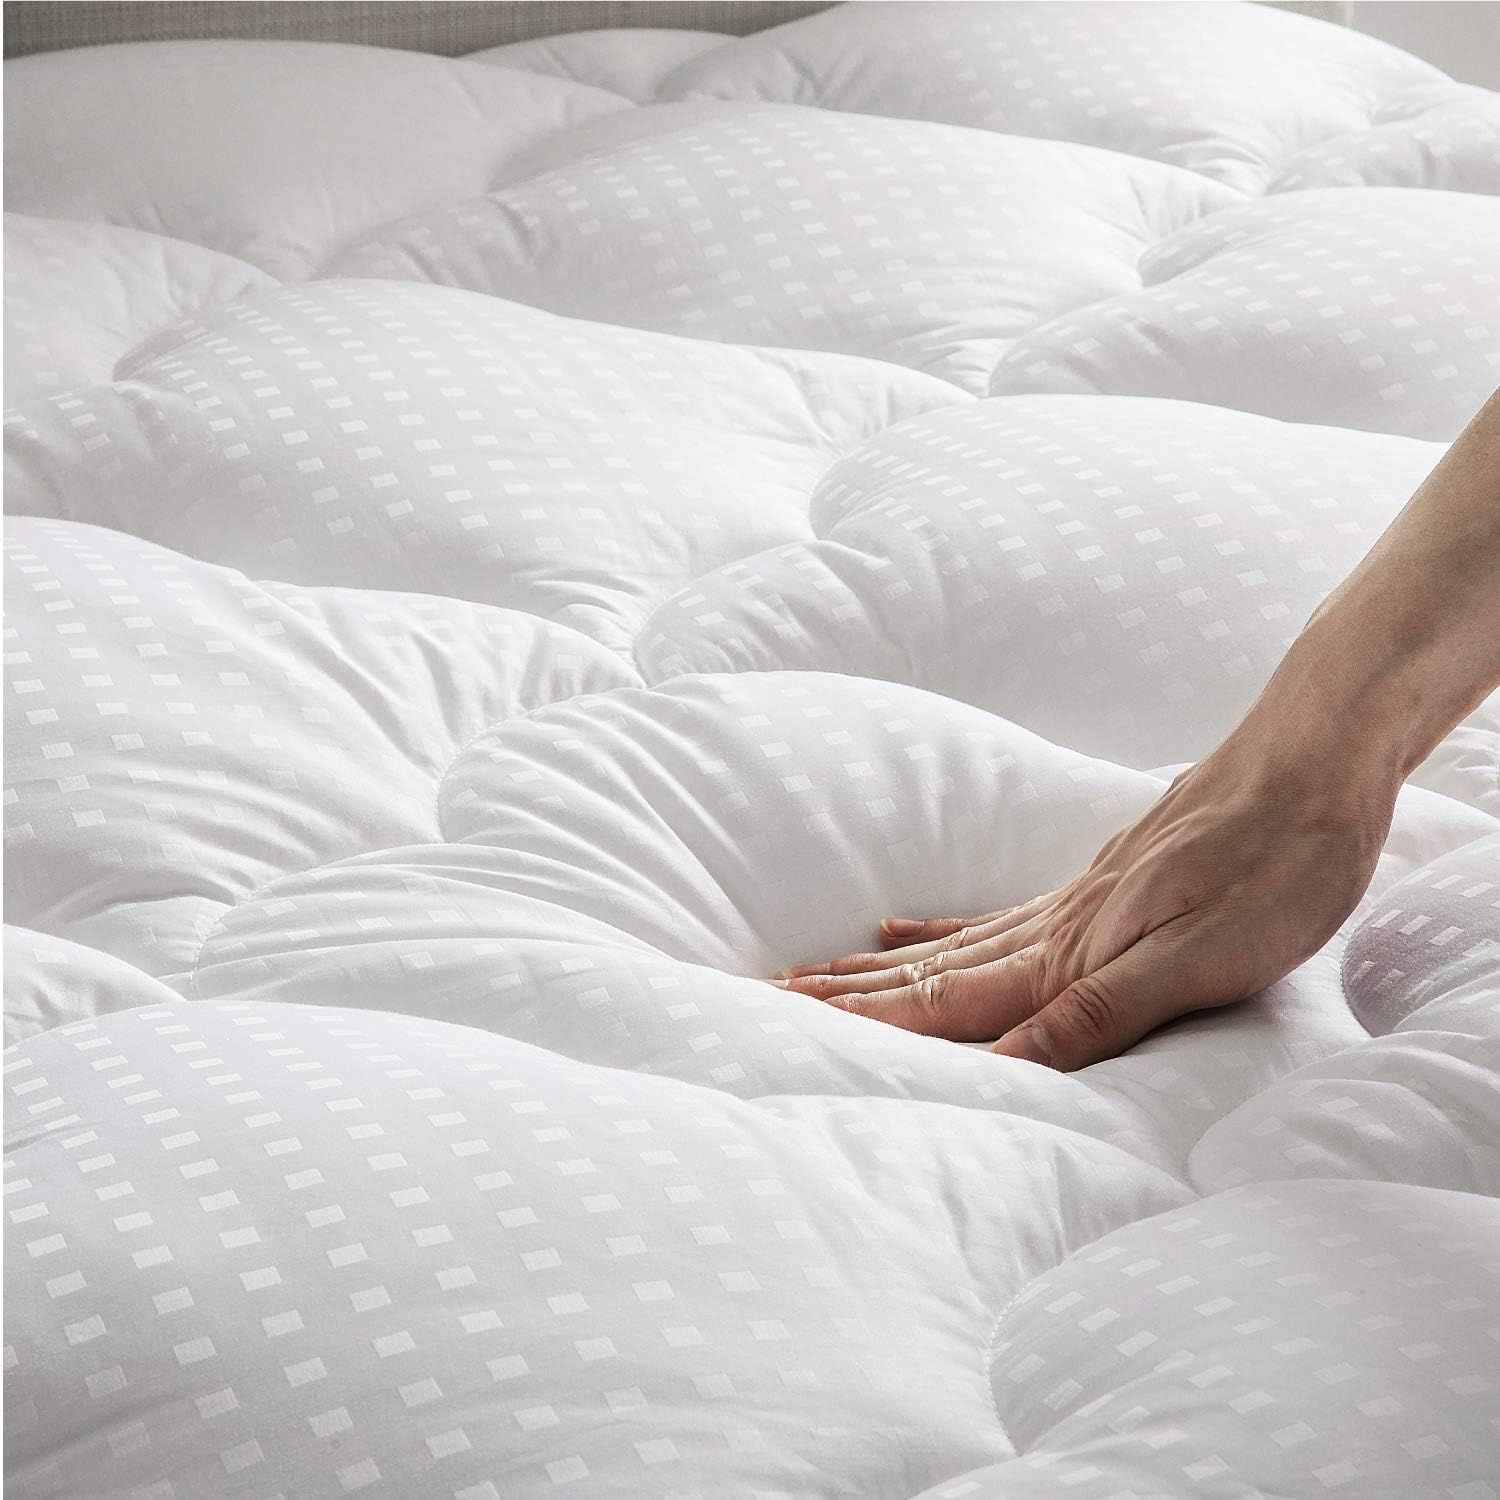 Bedsure Cotton Mattress Pad King Size (up to 18 inches) - Deep Pocket, Quilted Mattress Cover wit... | Amazon (CA)